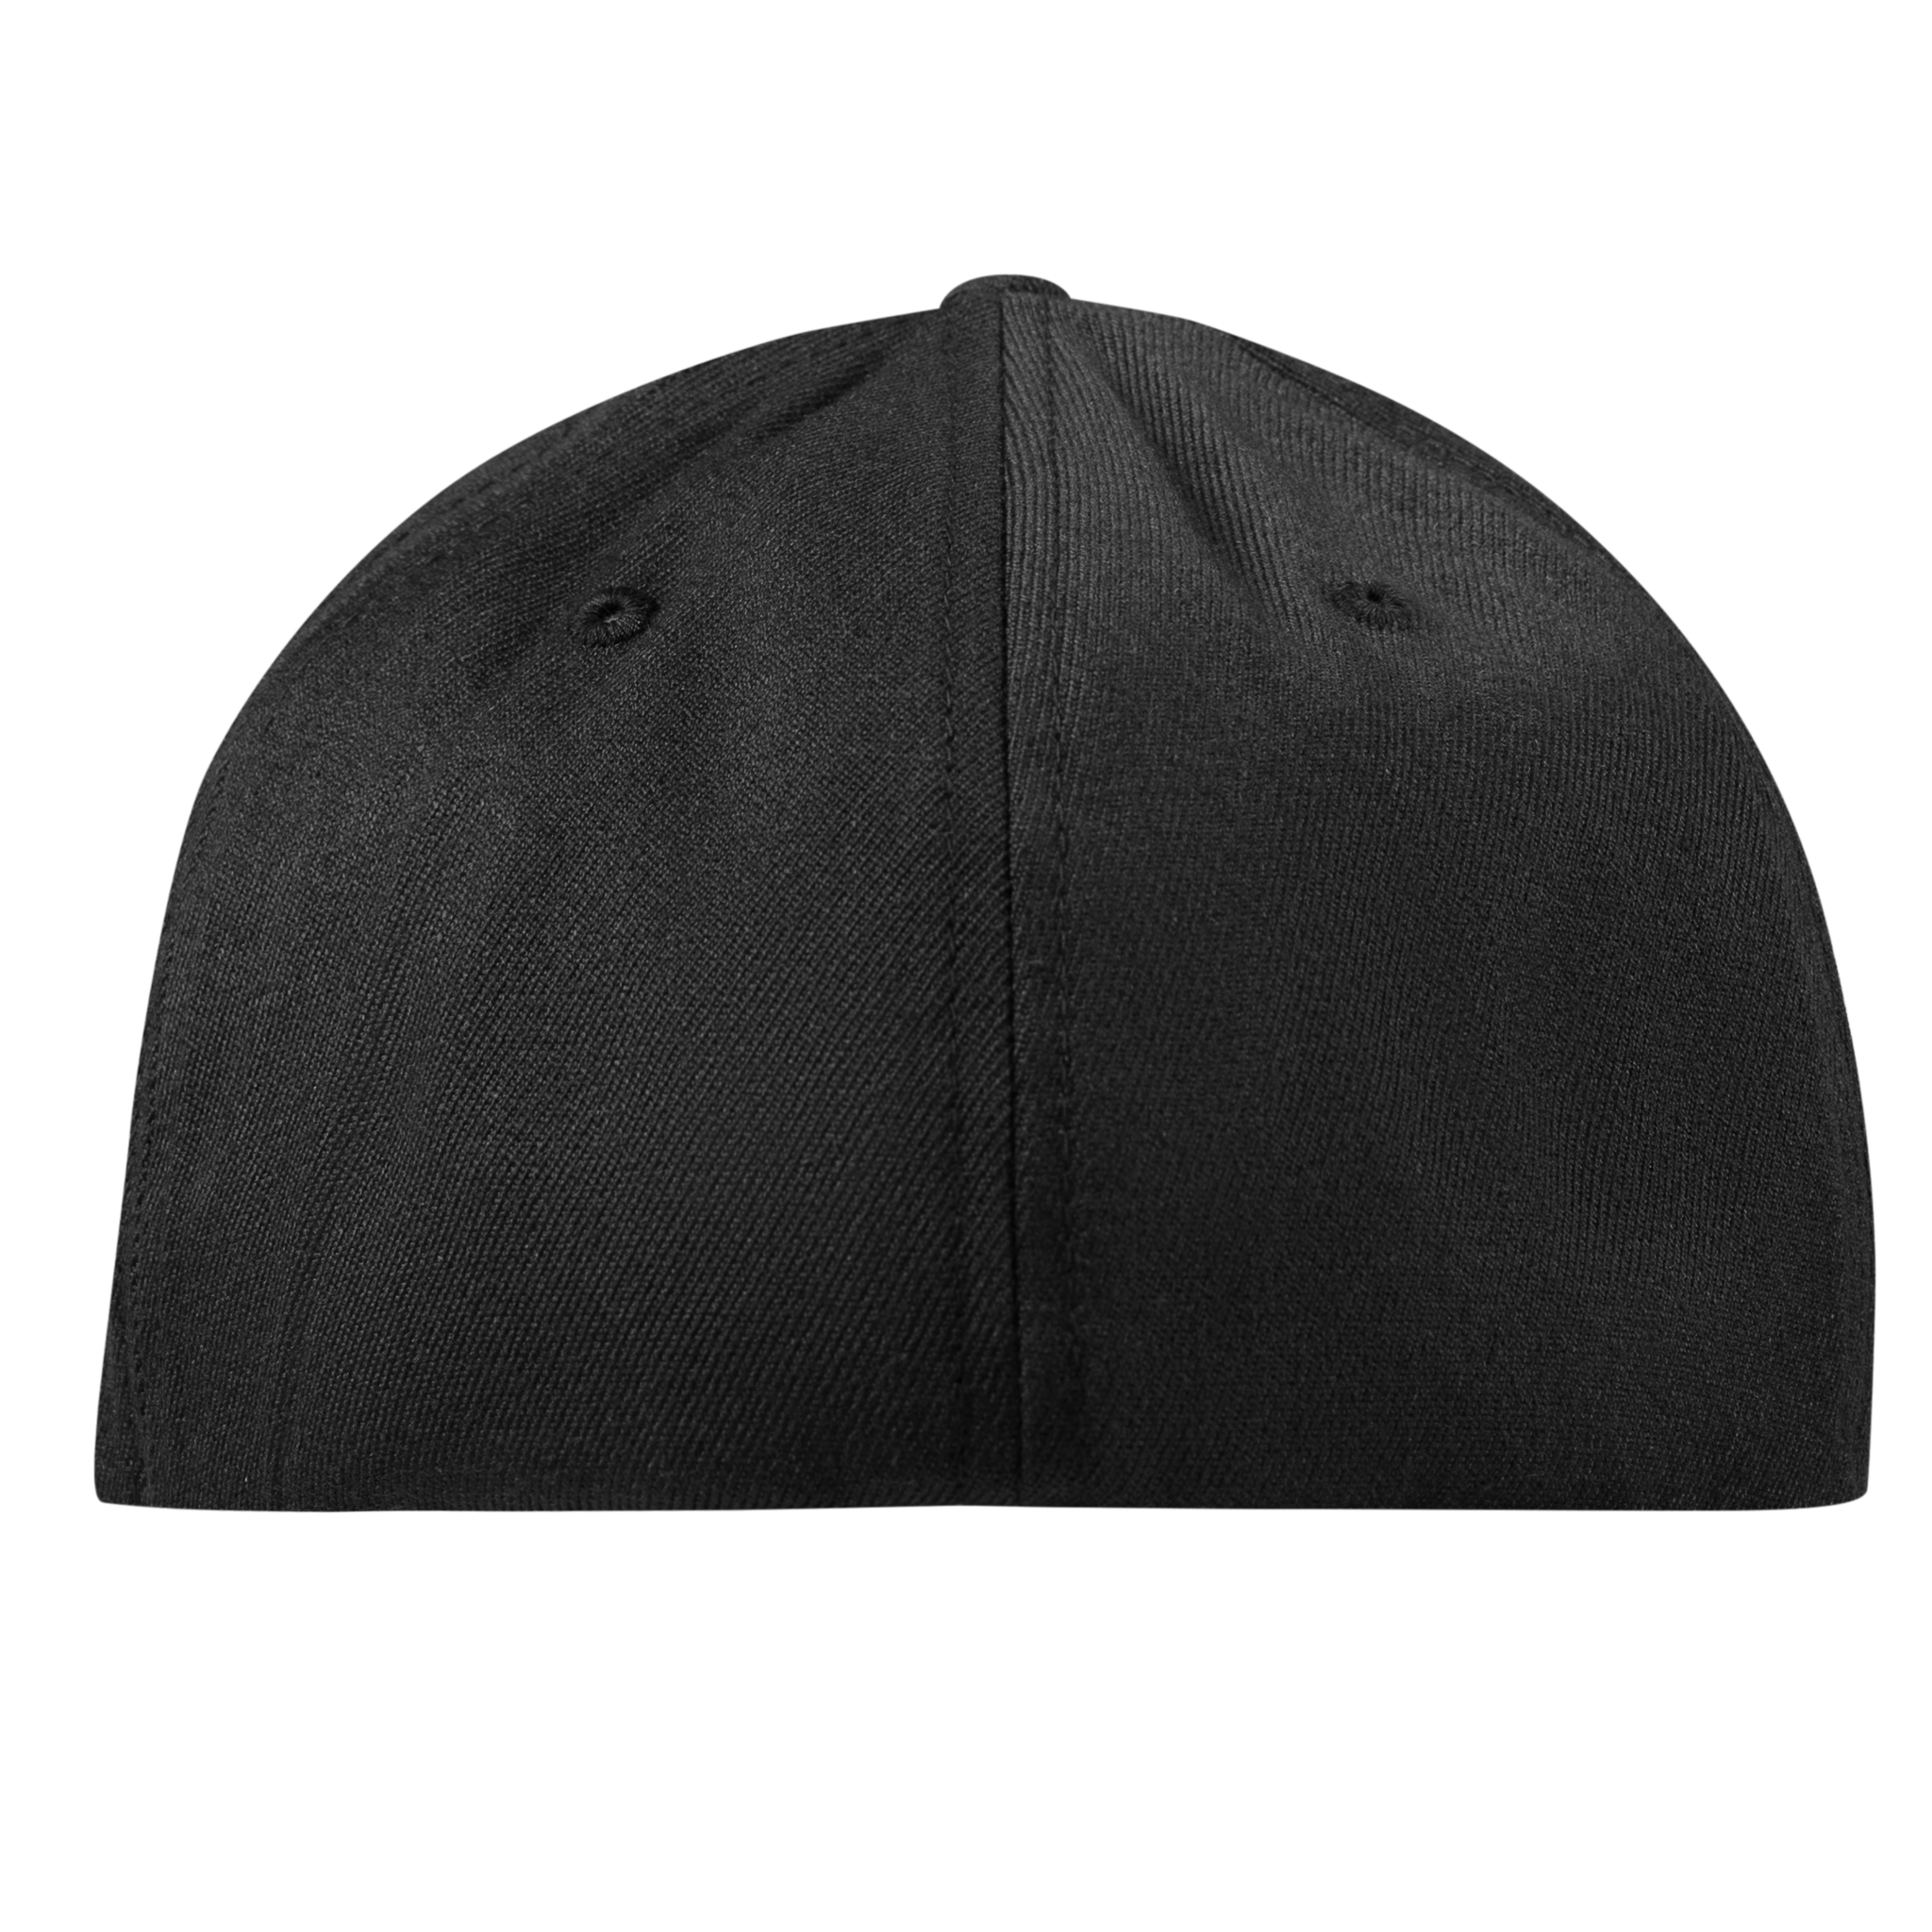 Wisconsin Camo Flexfit Fitted Back Black